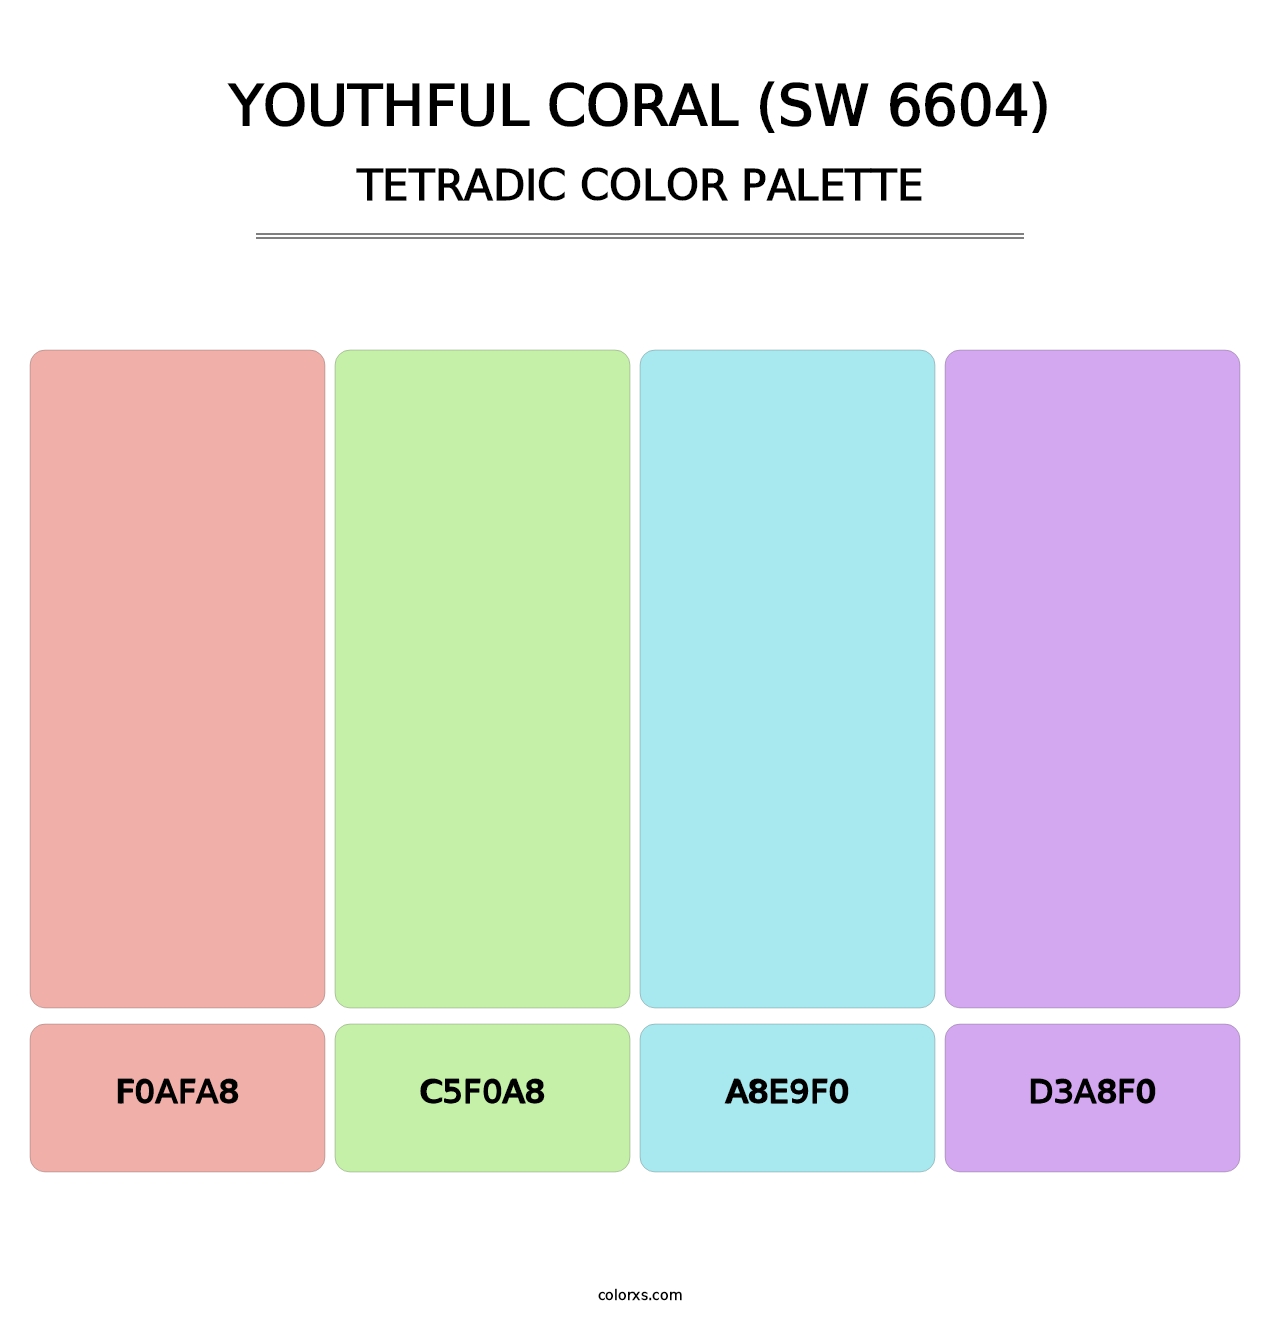 Youthful Coral (SW 6604) - Tetradic Color Palette